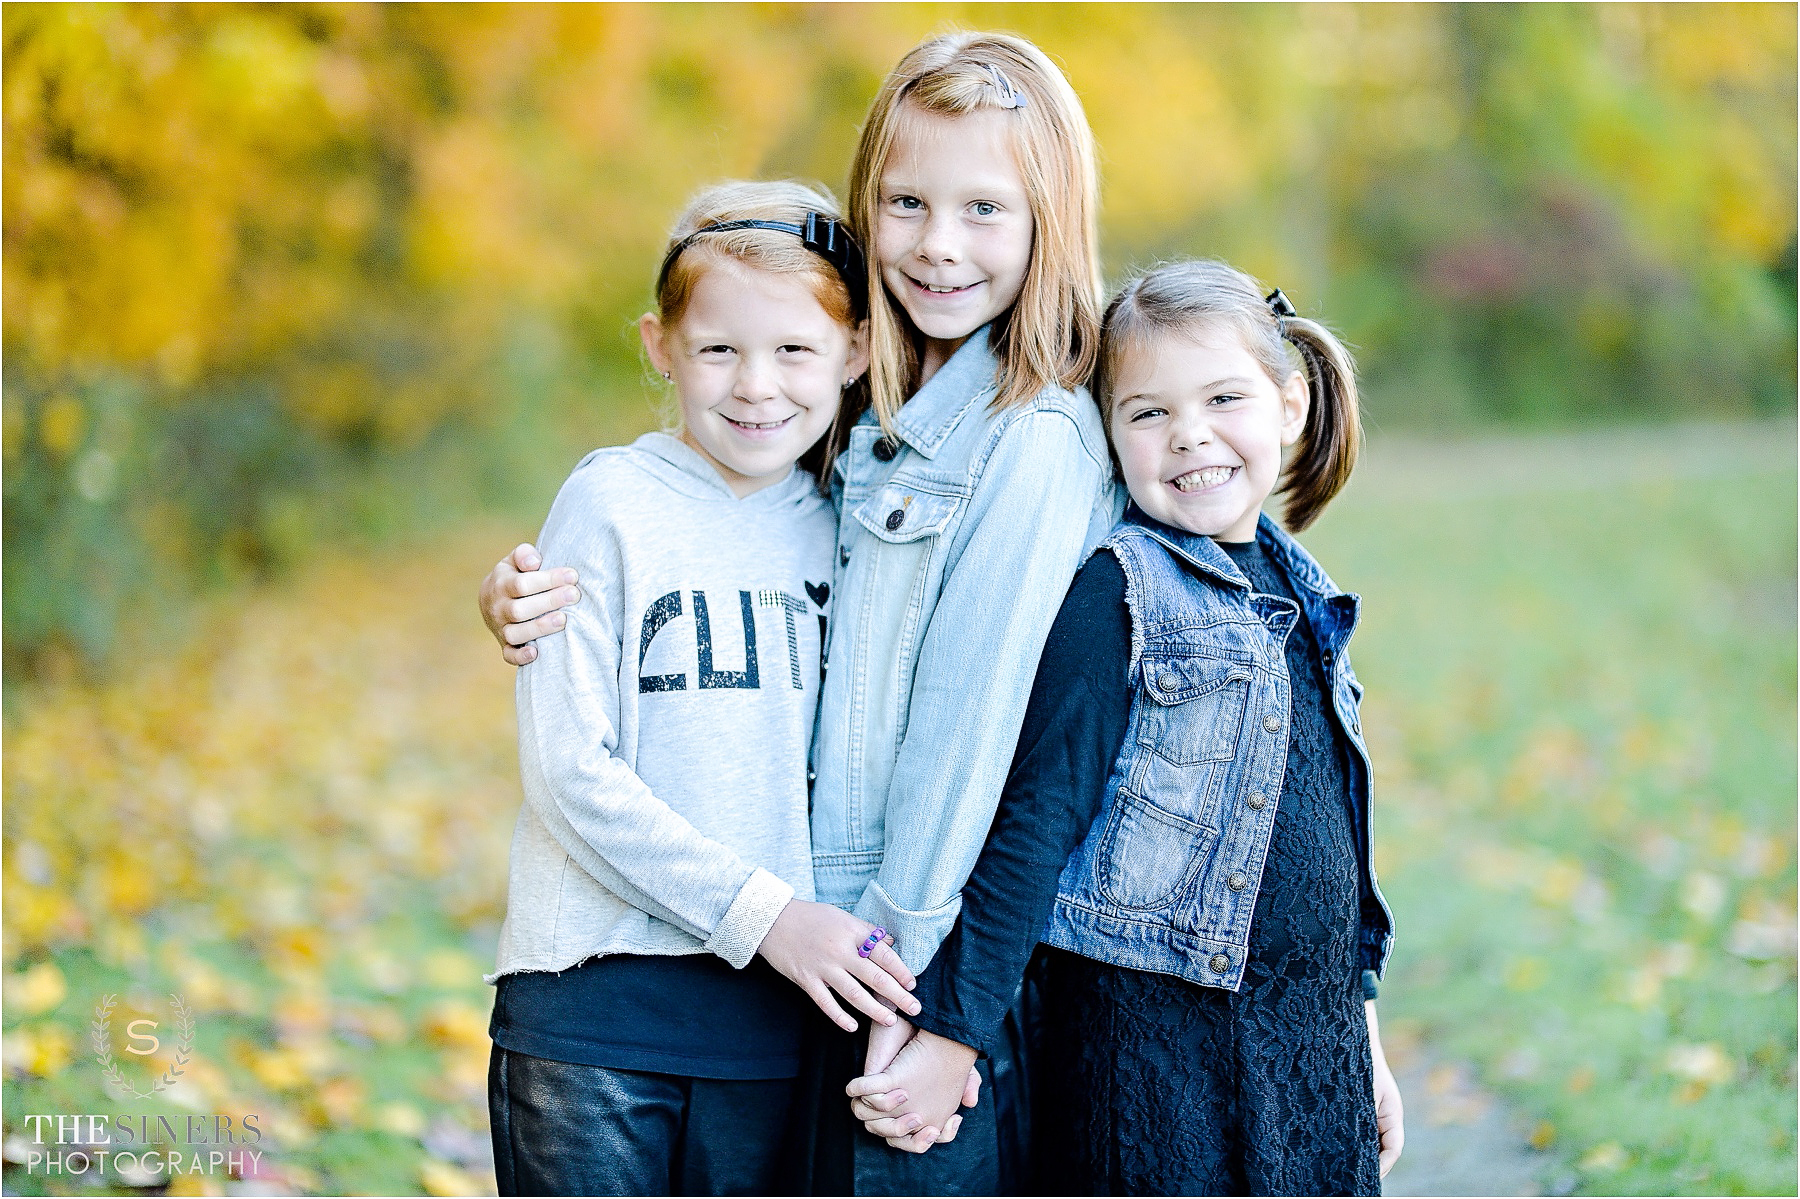 Sumrall Family_Indianapolis Family Photographer_TheSinersPhotography_0030